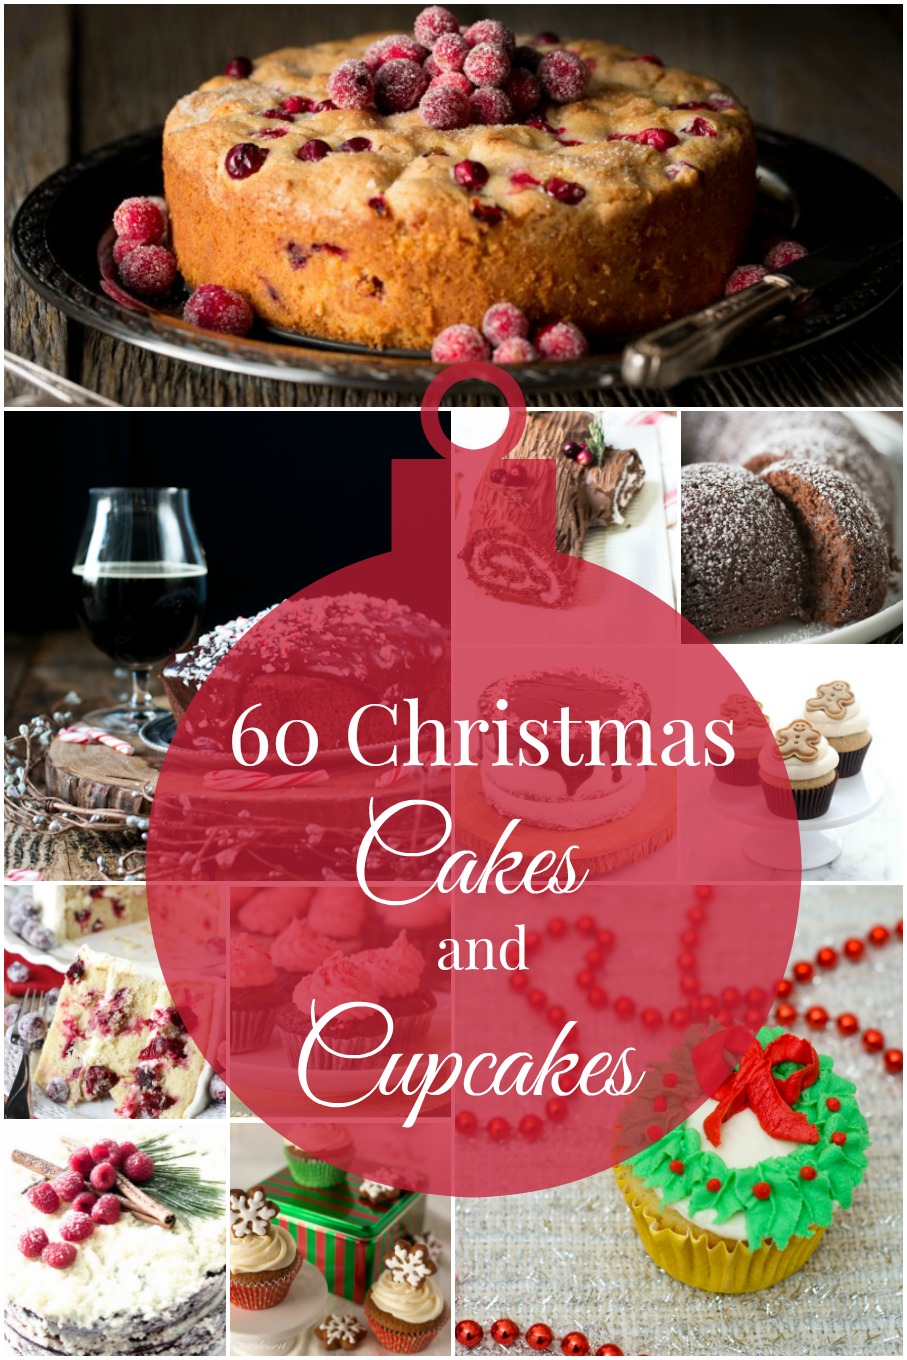 As you plan your Christmas menu, don't forget dessert! I have 60 Christmas cakes and cupcakes that feature flavors like gingerbread and eggnog, and Christmas decorations!